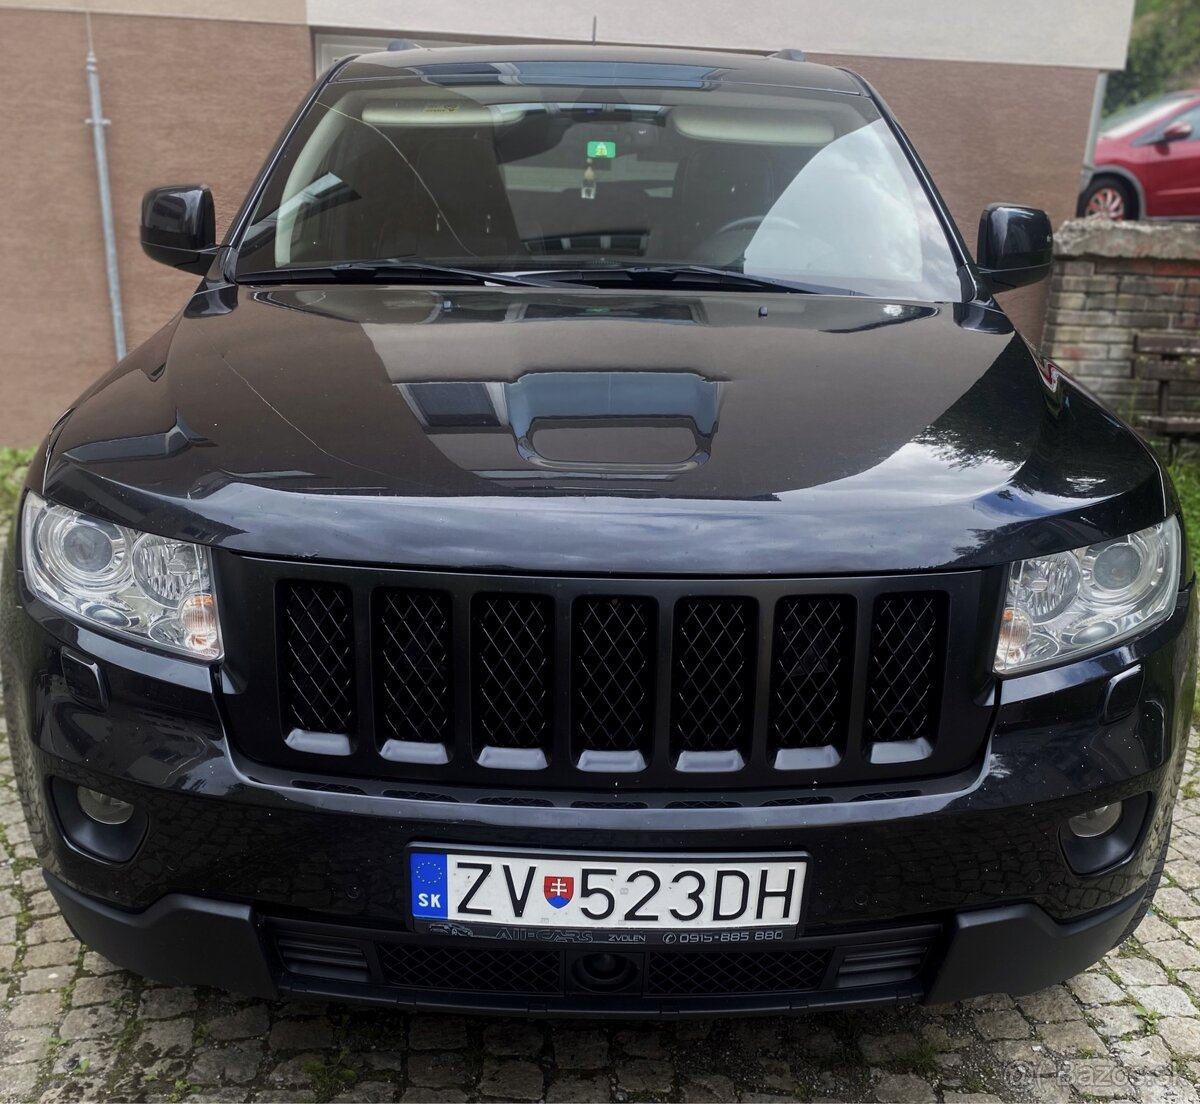 Jeep Grand Cherokee 3.0 CRD Limited 4x4